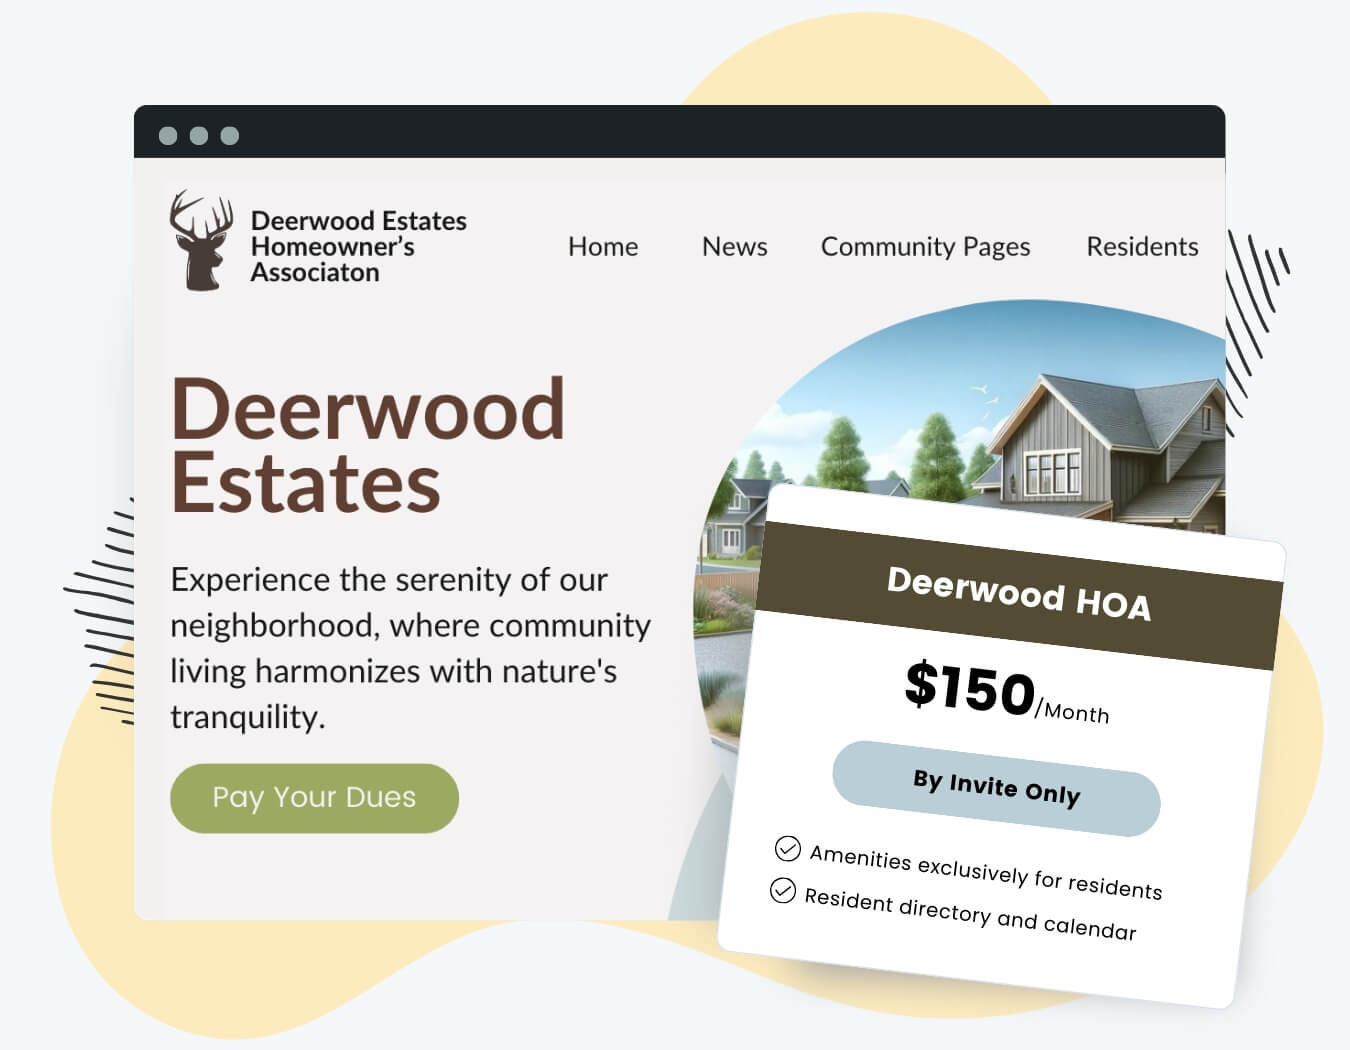 Screenshot of a homeowner association website dashboard with a sign up by invite only to pay HOA dues and access community features.